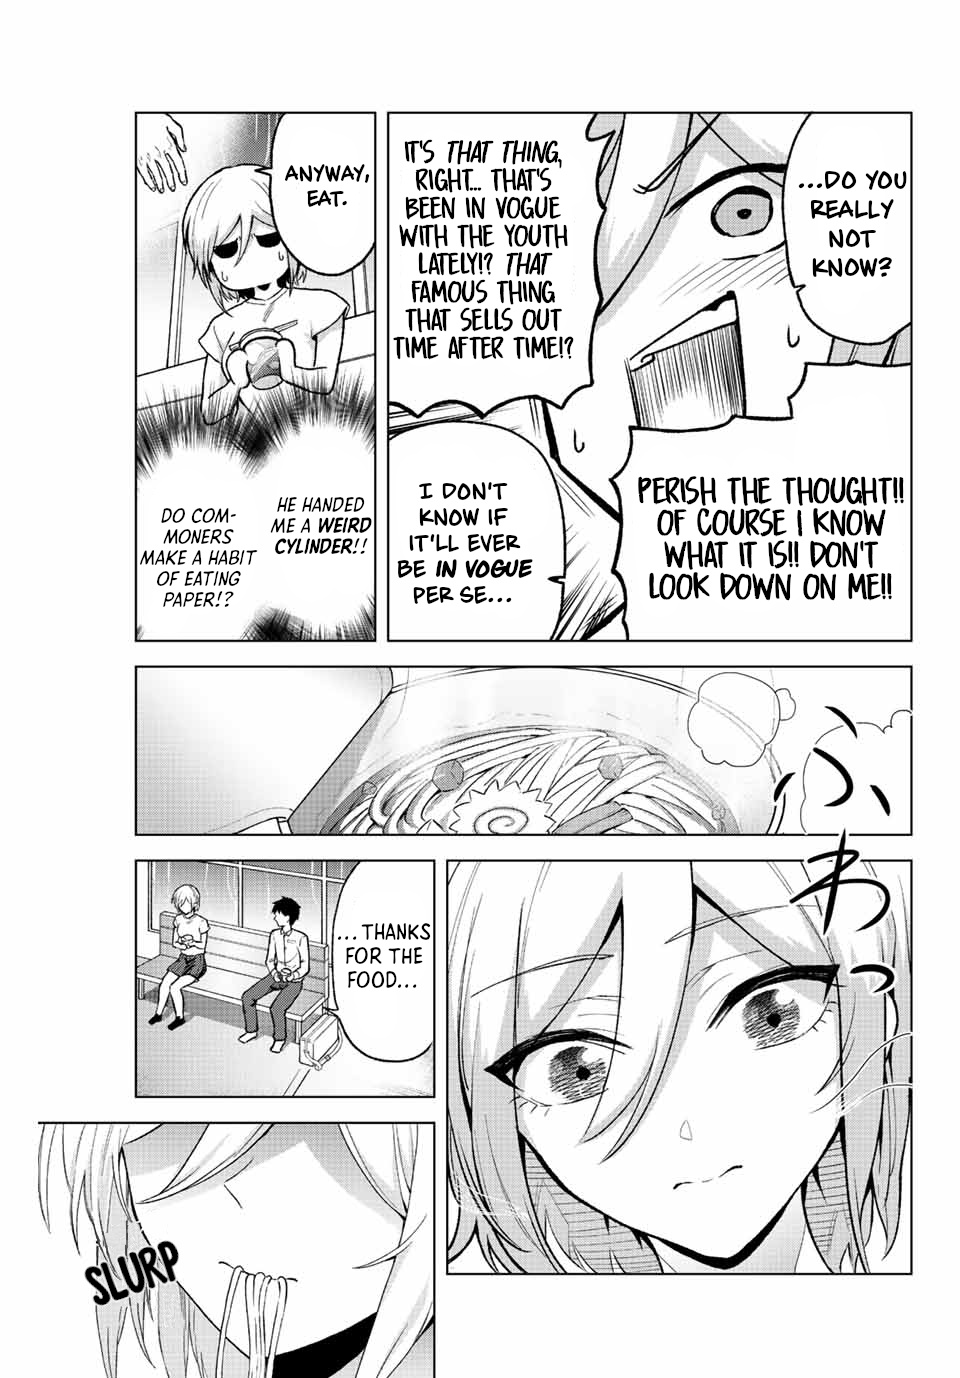 The Death Game Is All That Saotome-San Has Left - Page 3